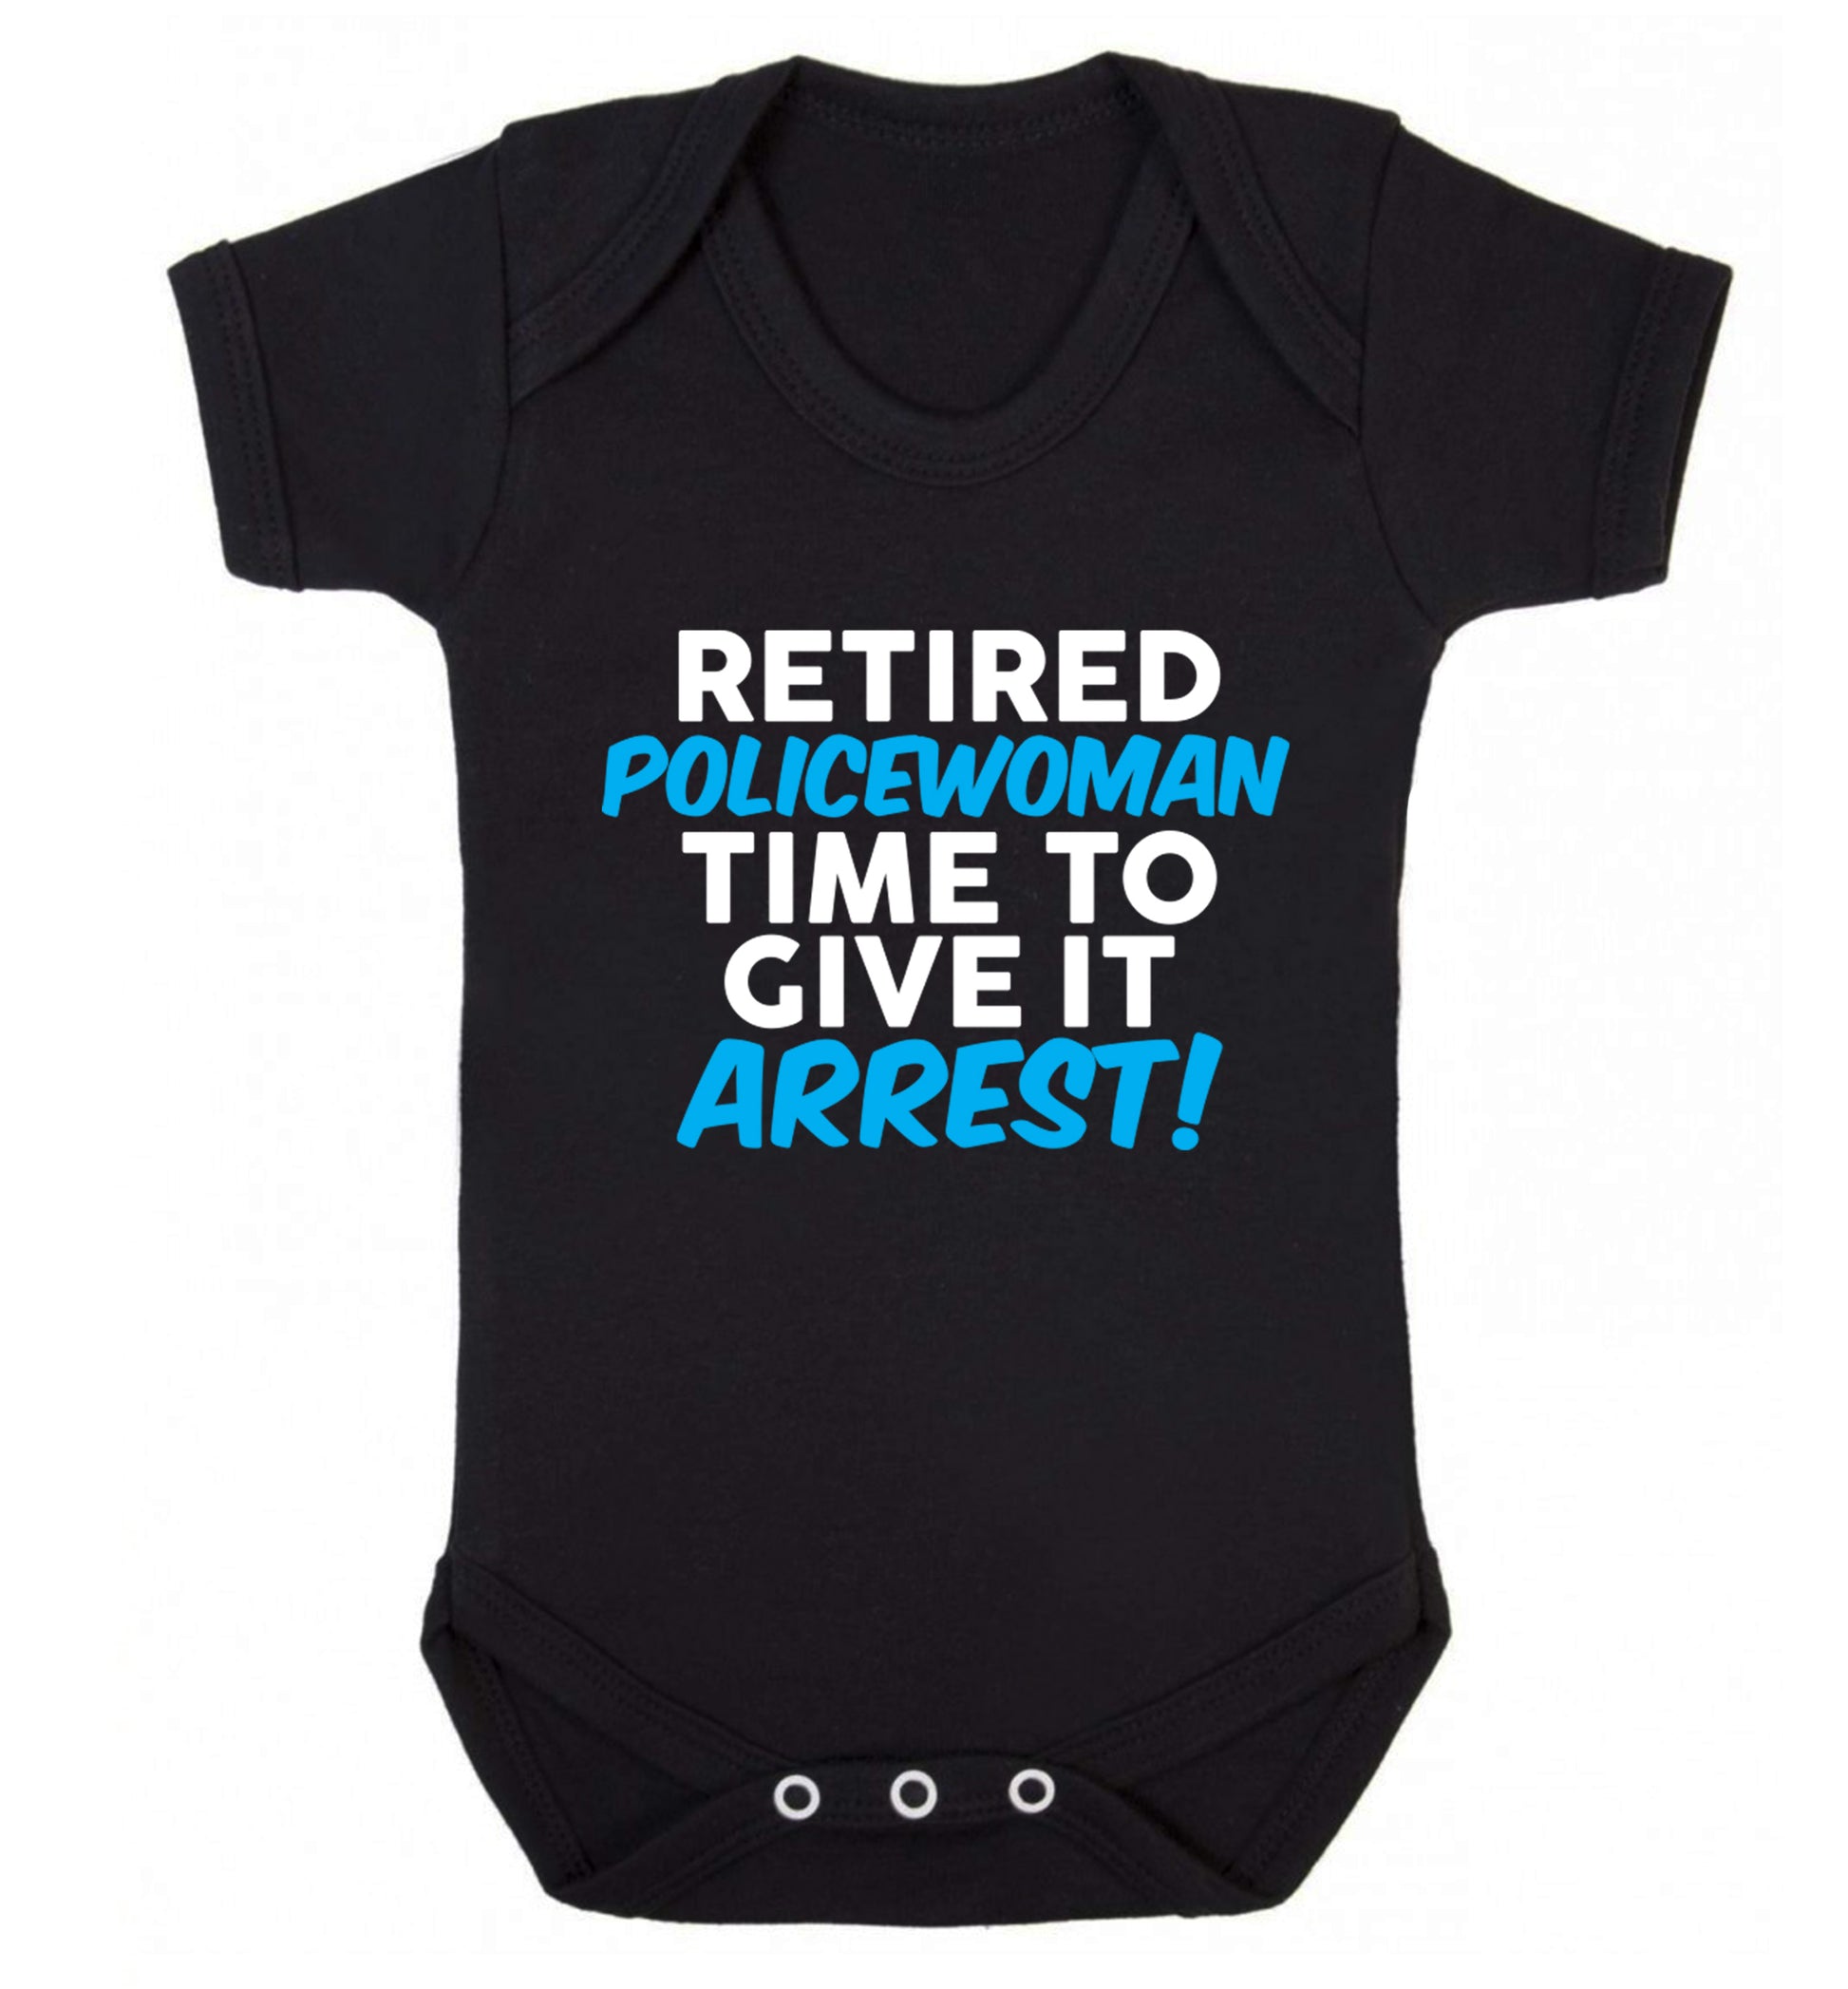 Retired policewoman time to give it arrest Baby Vest black 18-24 months